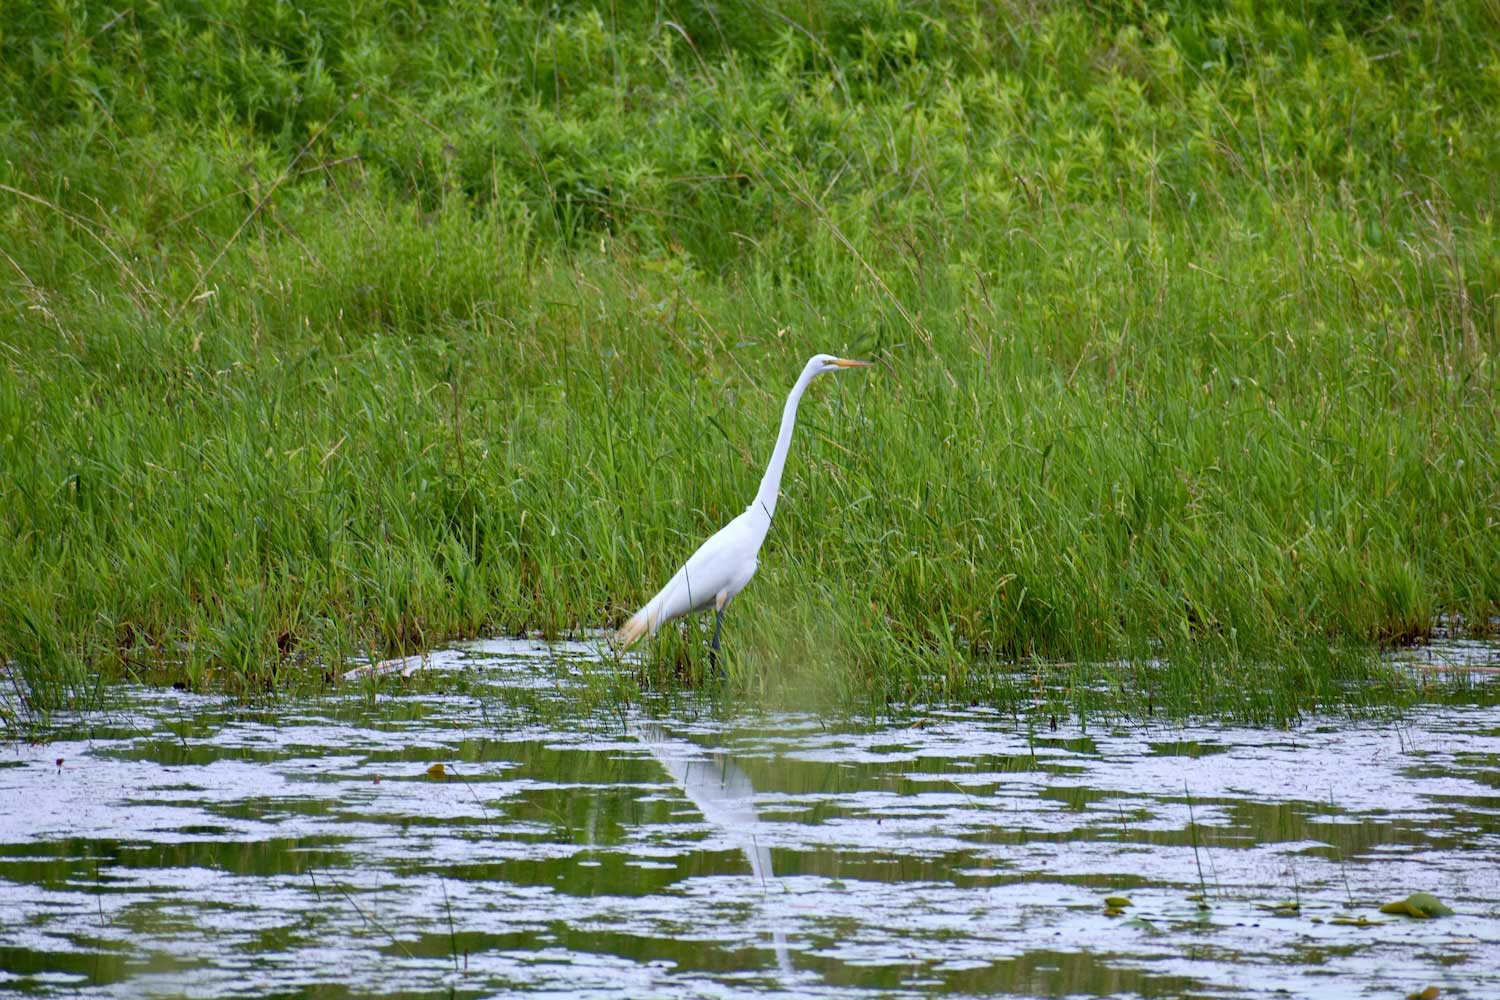 A great egret wading in shallow water with grasses behind it.